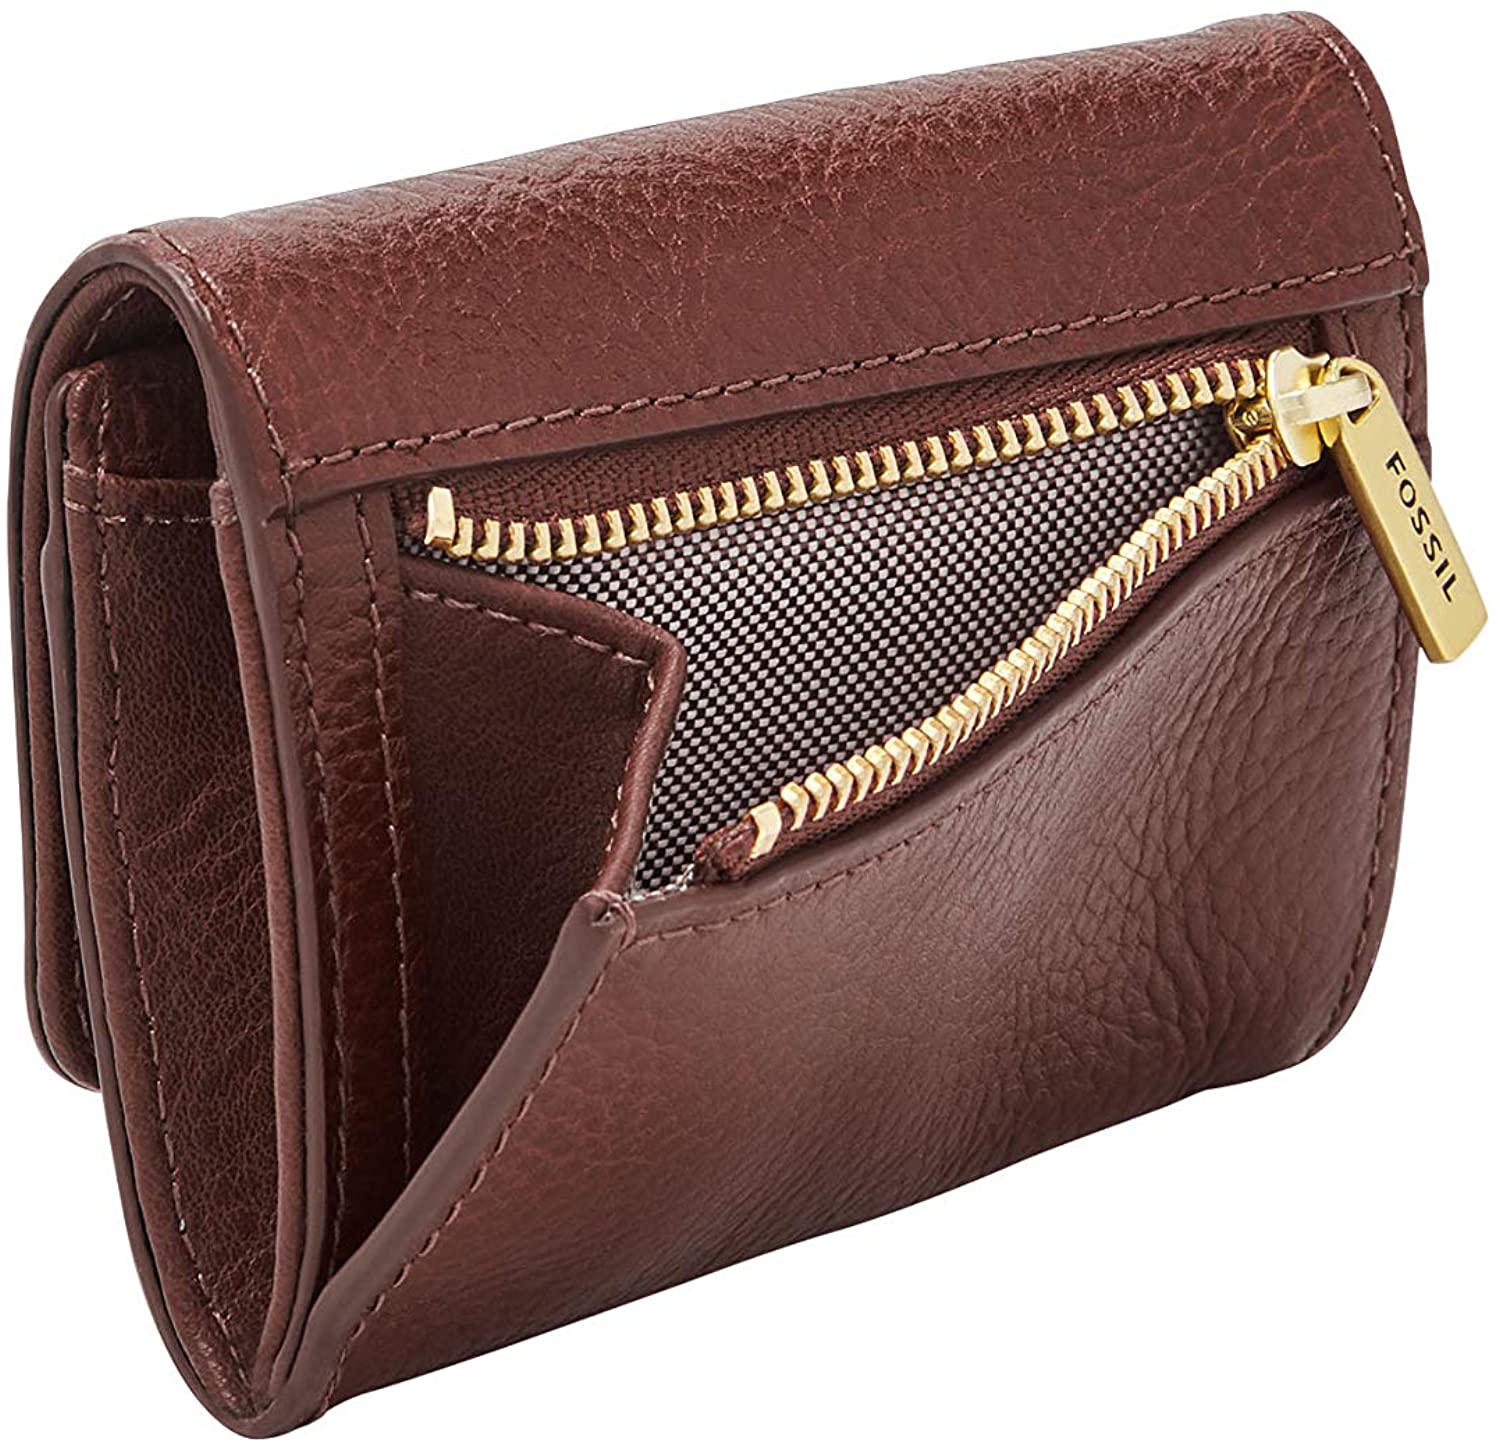 Fossil Womens RFID Small Flap Wallet